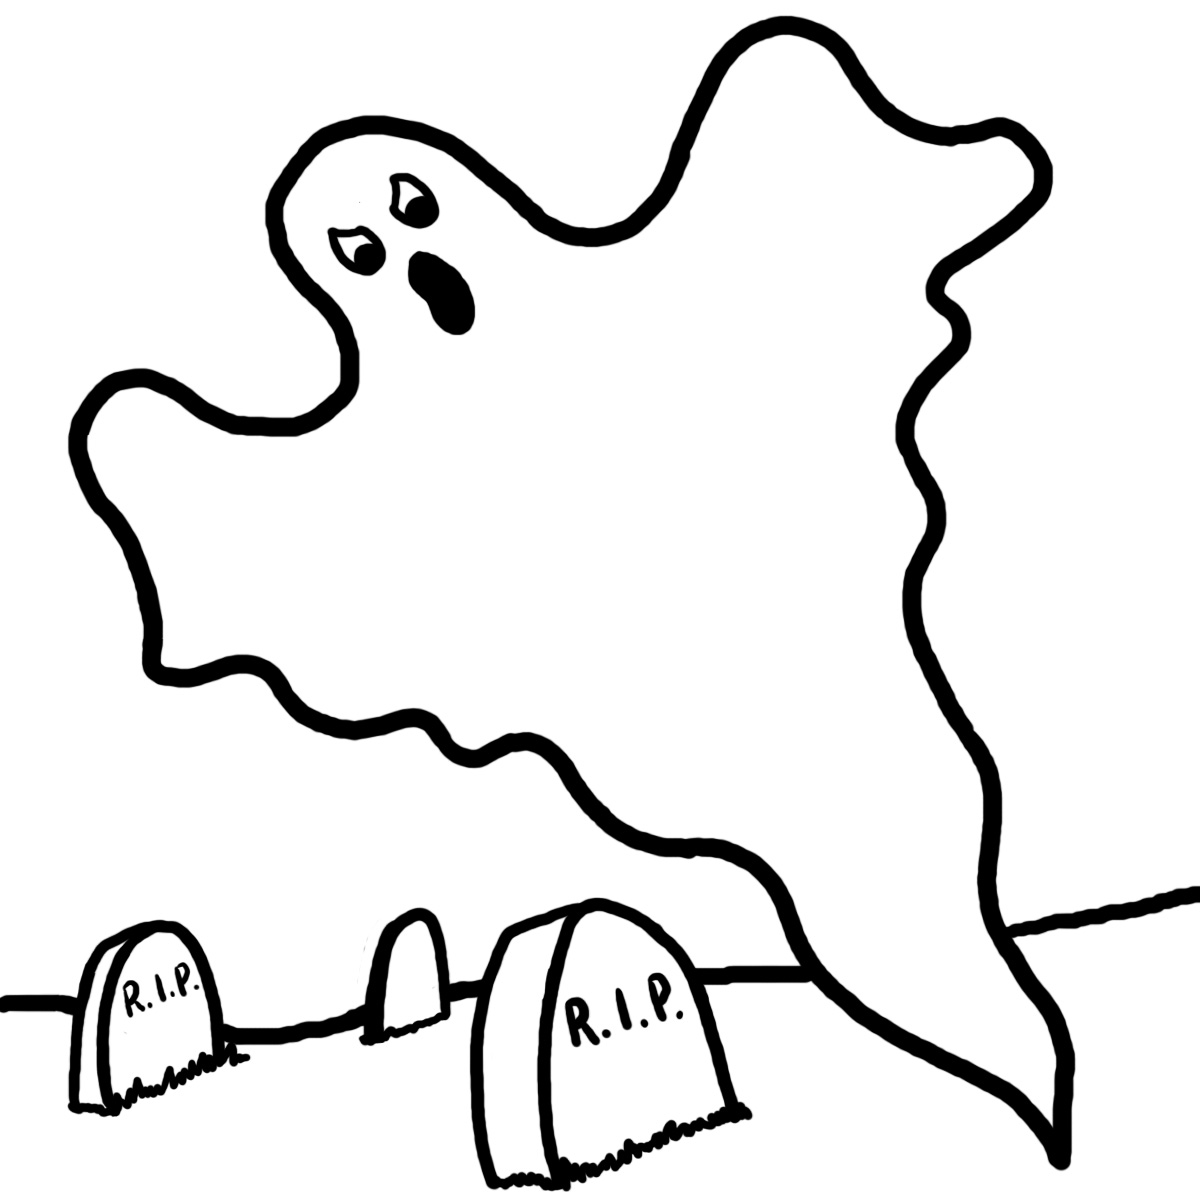 Halloween Clip Art Black And White Ghost | Clipart Panda - Free ...